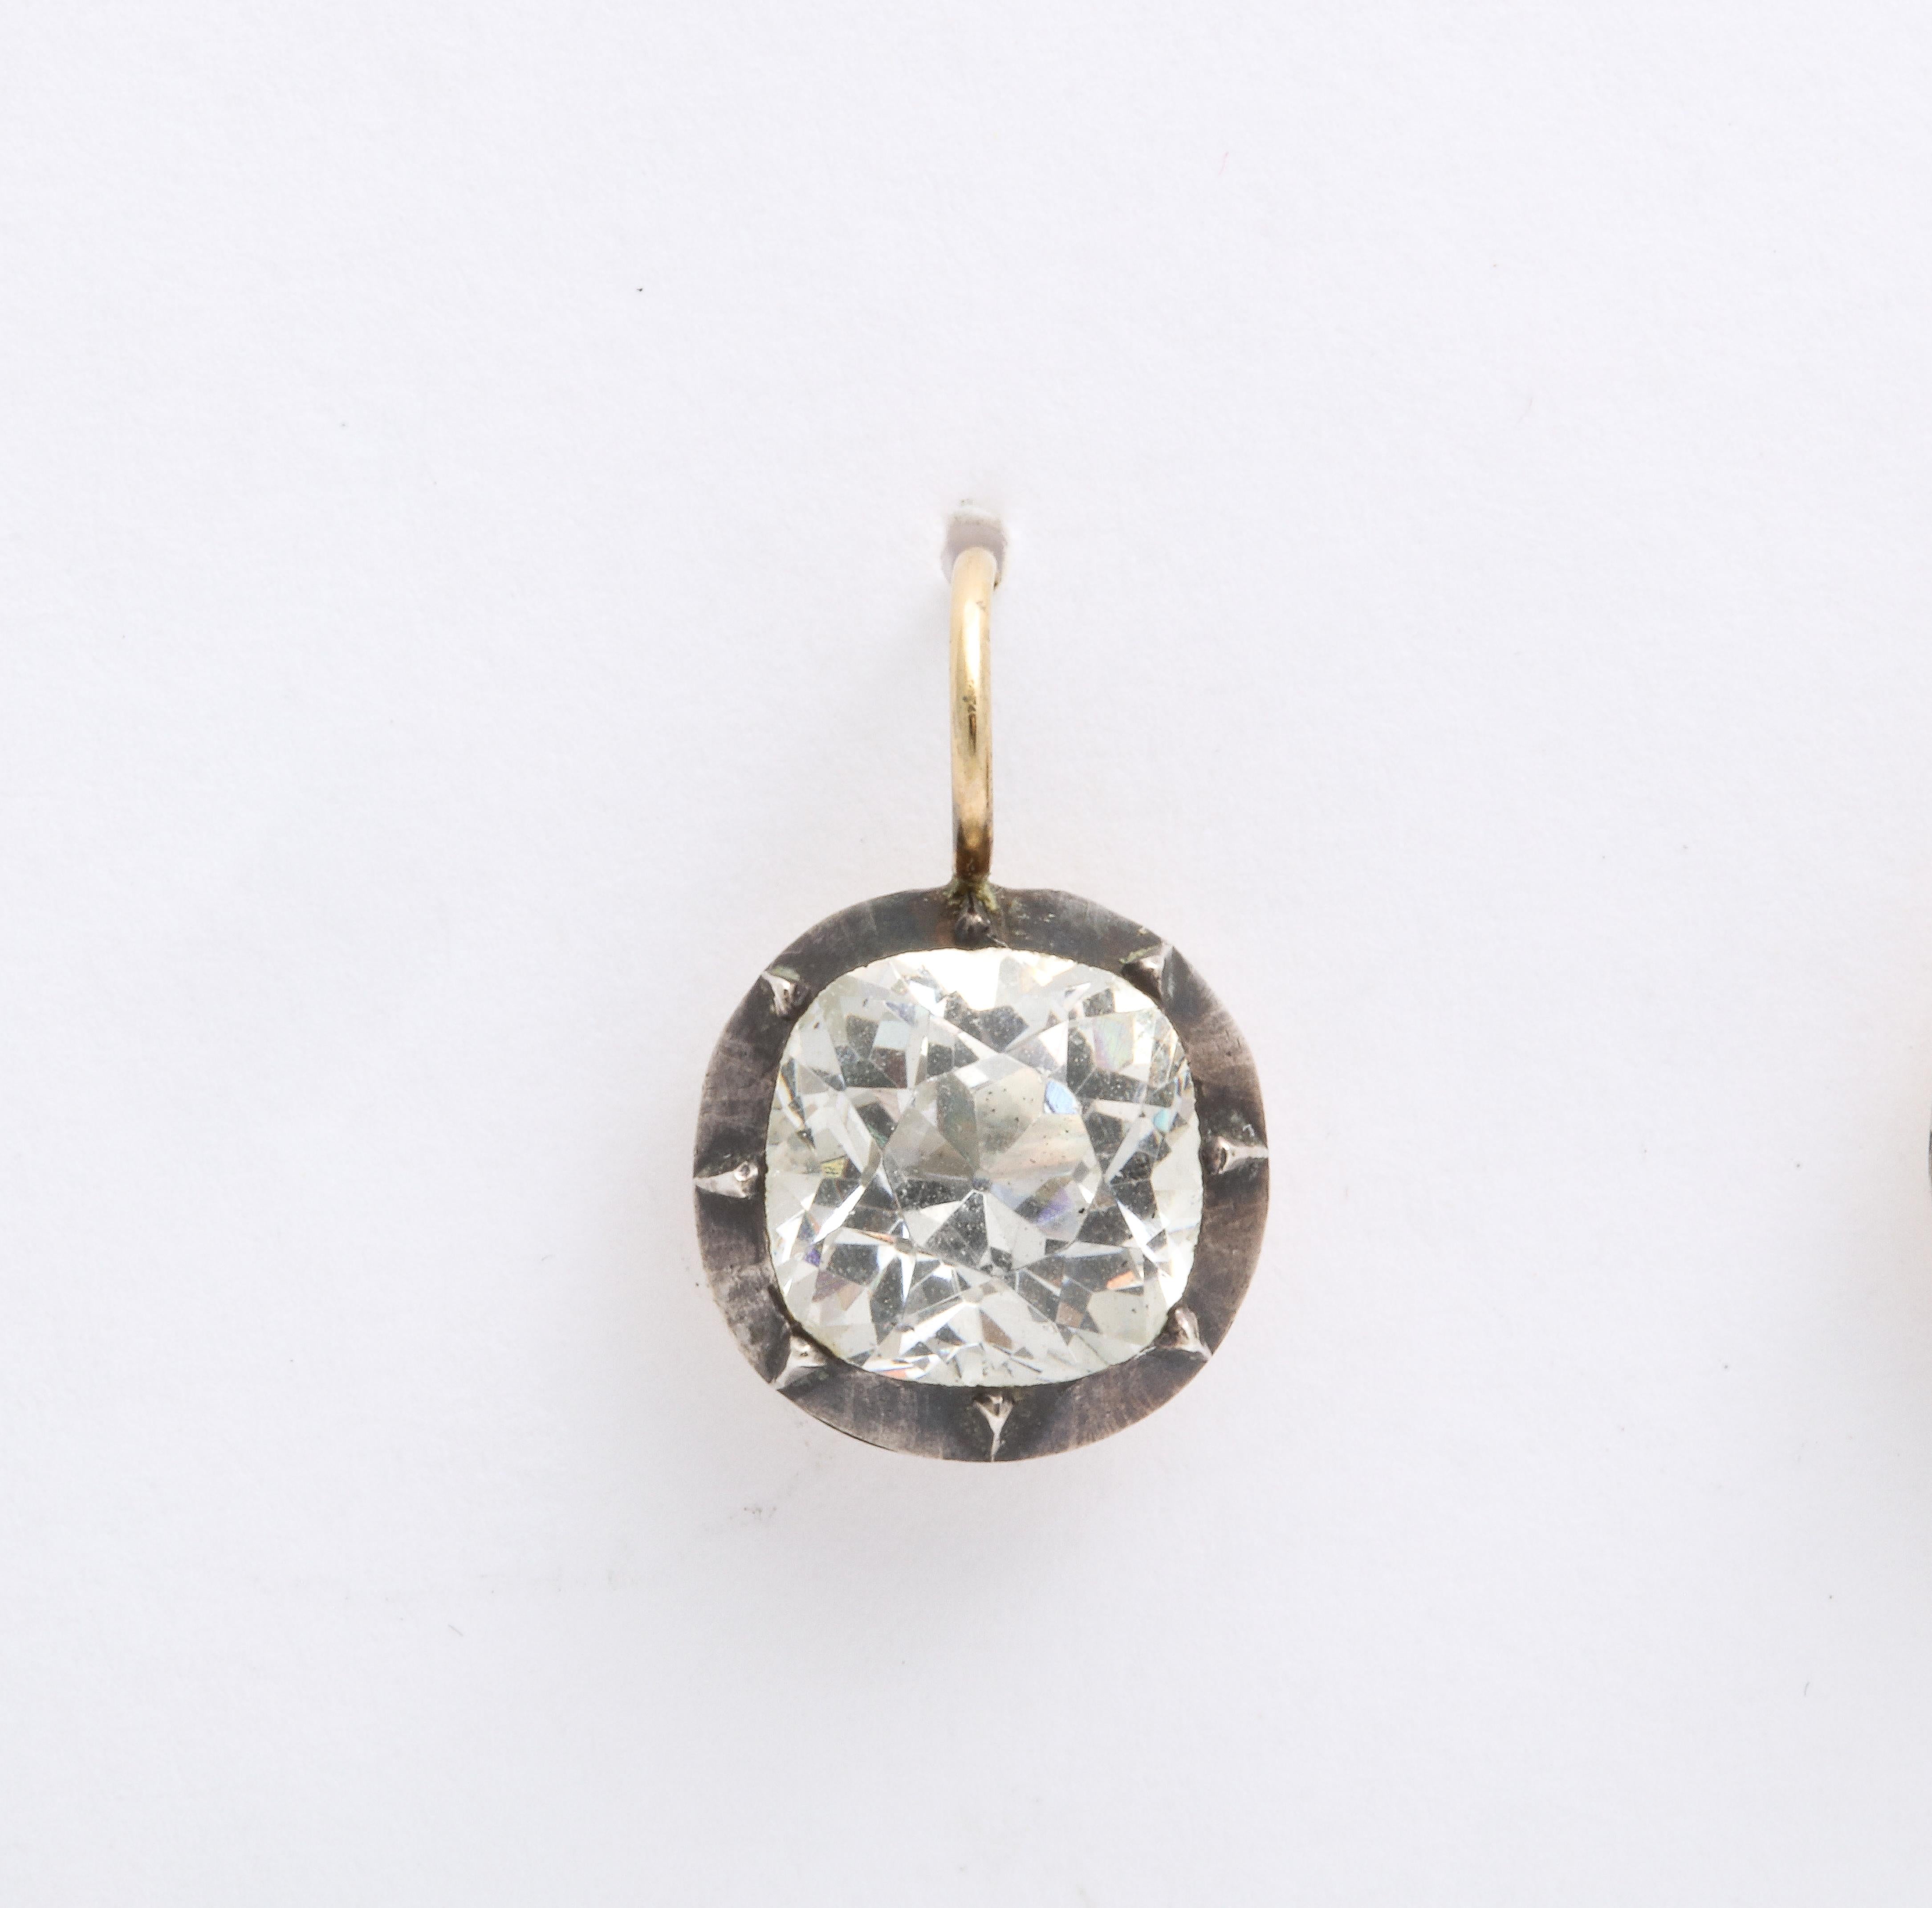 Authentic hand crimped setting are frames for brilliant foiled paste stones of 2.25 cts. The pastes are especially radiant and winning. Earrings like these original drops can be worn everyday, every way. All paste earrings were originally a necklace